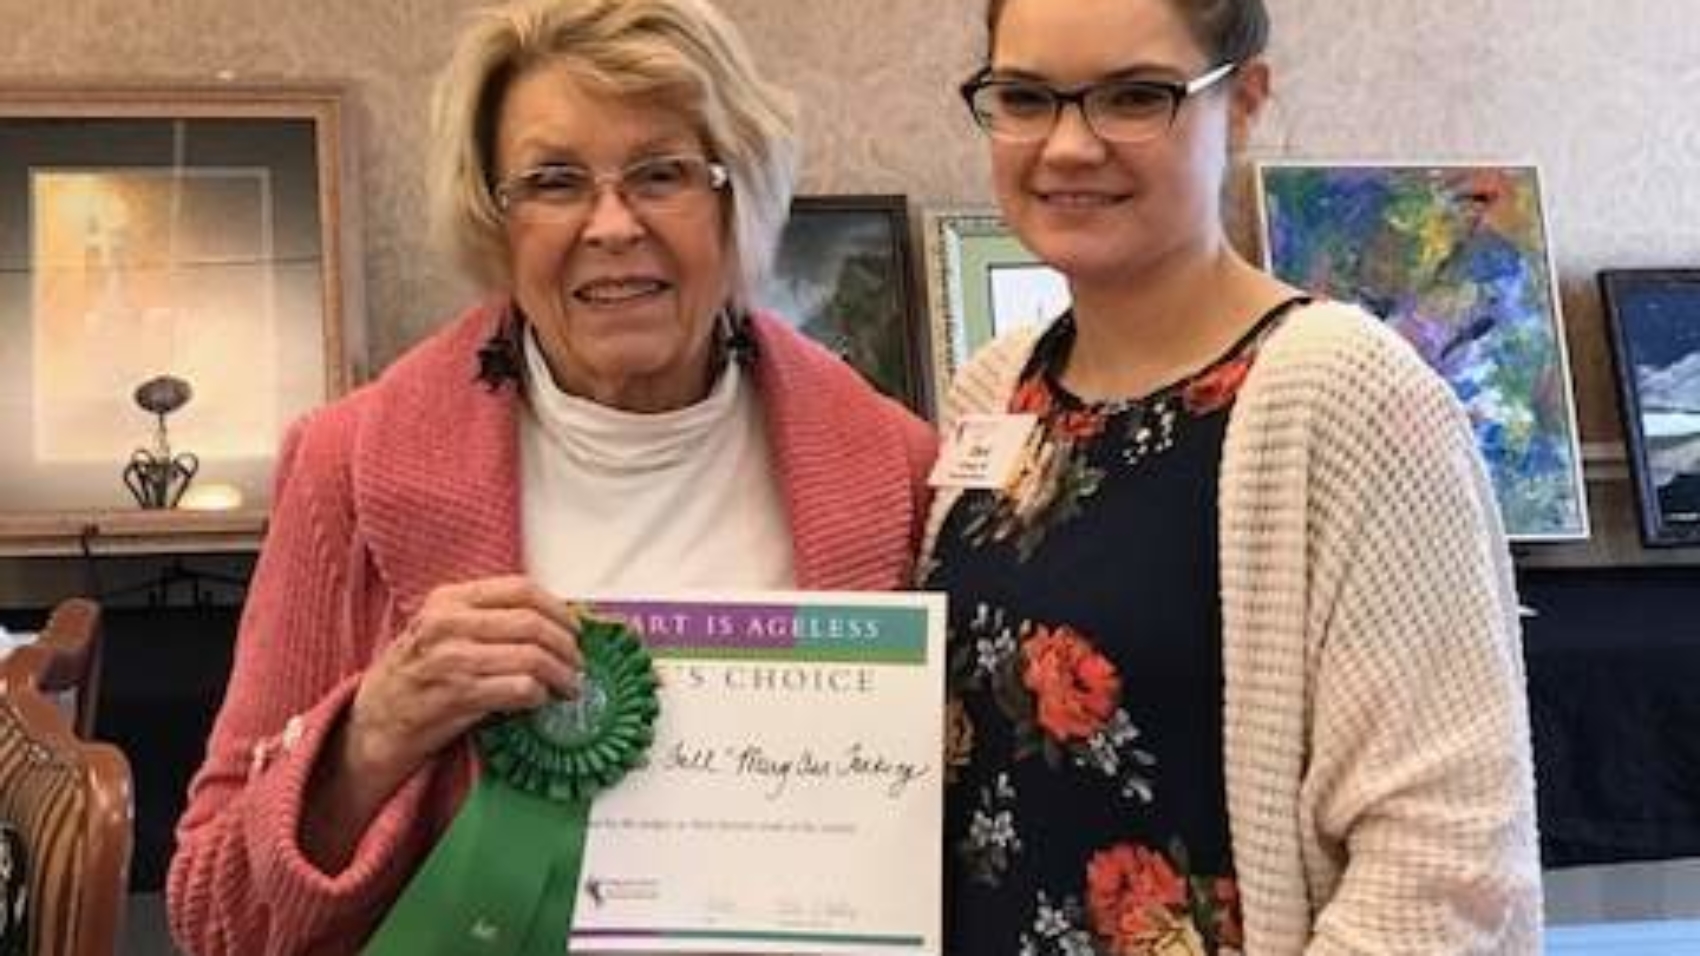 Mary Ann Tanking’s piece “Spring into Fall” was the Judges’ Choice at the Salina Presbyterian Manor Art is Ageless exhibit.